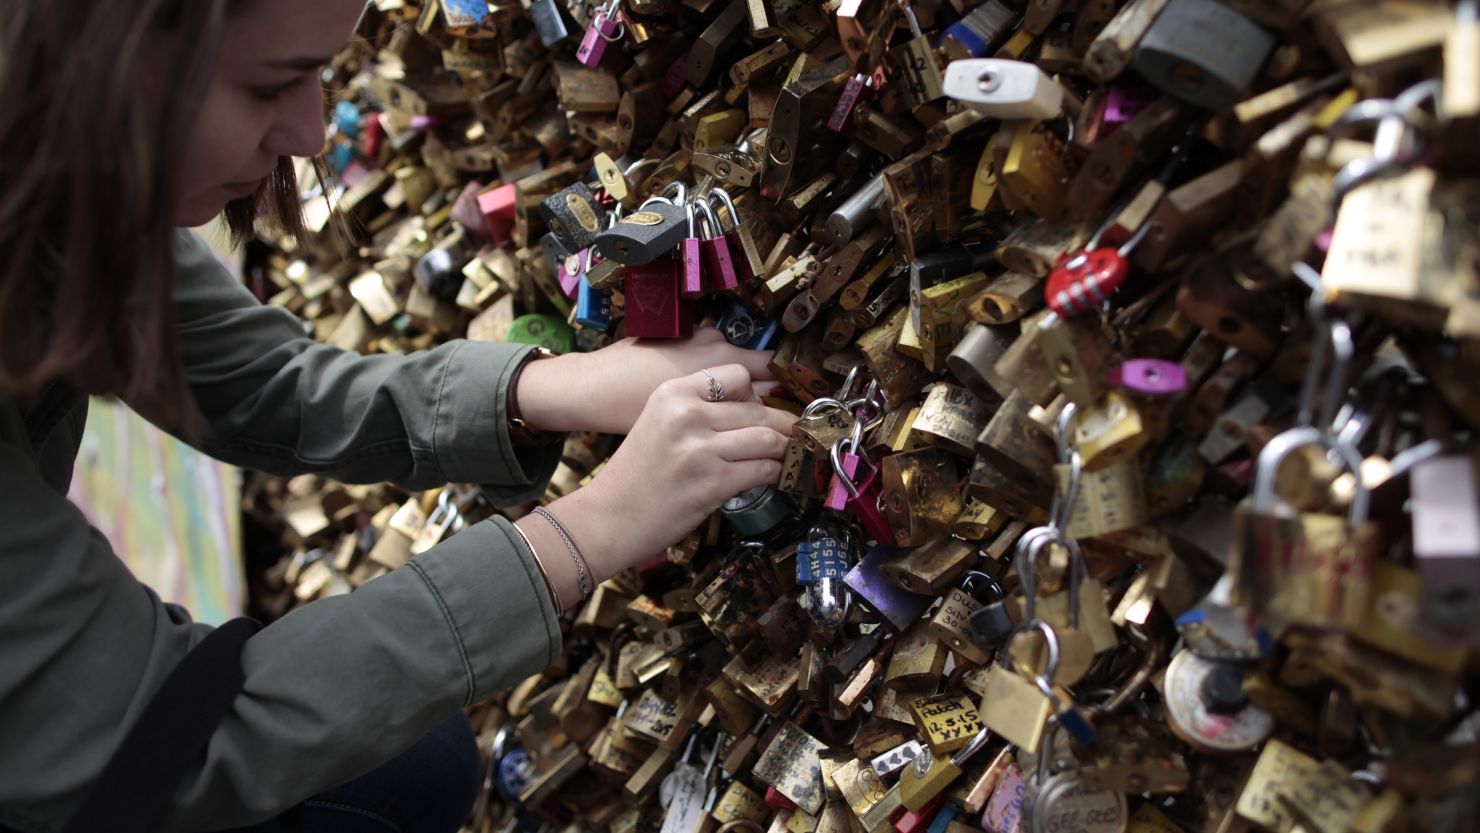 The tons of locks removed form Paris's bridges will be auctioned to help refugees. The unique sale will have around 150 pieces composed by the old padlocks. 